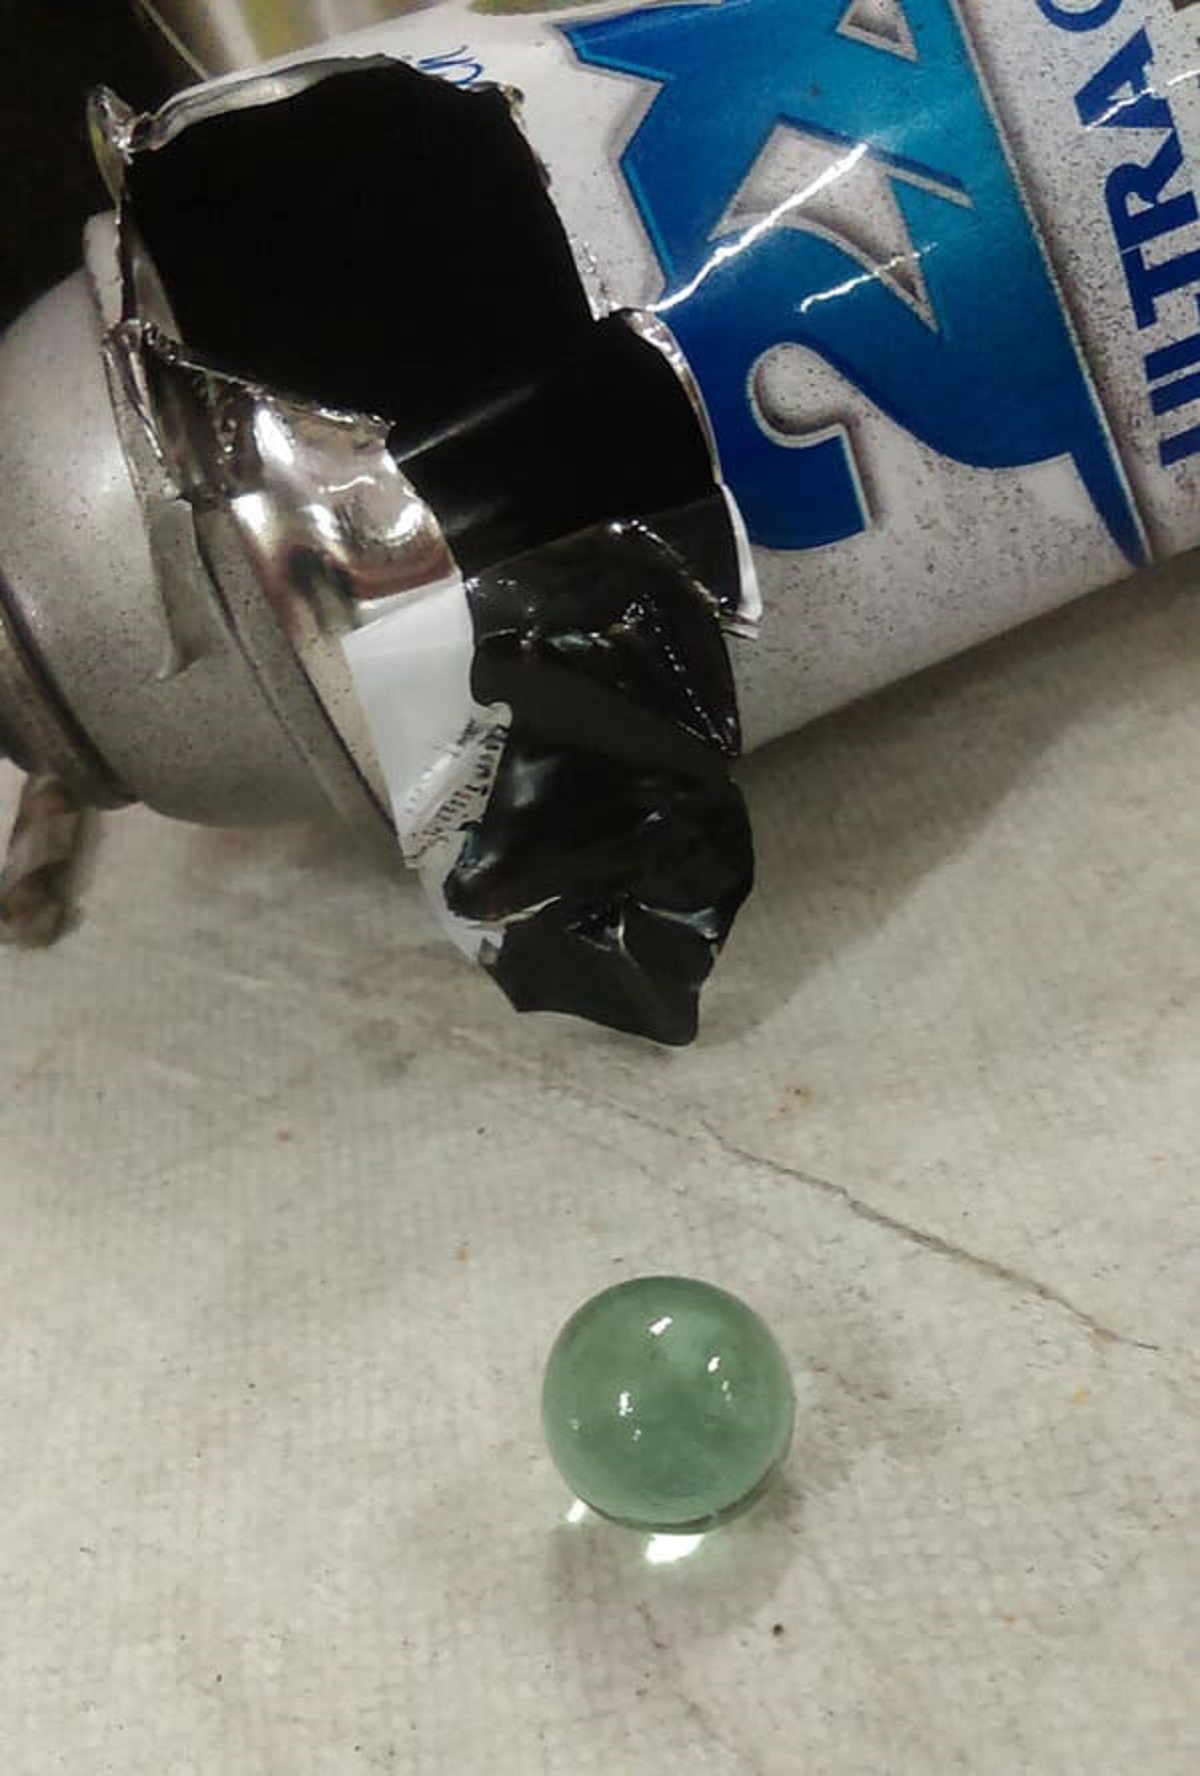 “This Is What The Ball Inside Of A Paint Can Looks Like”